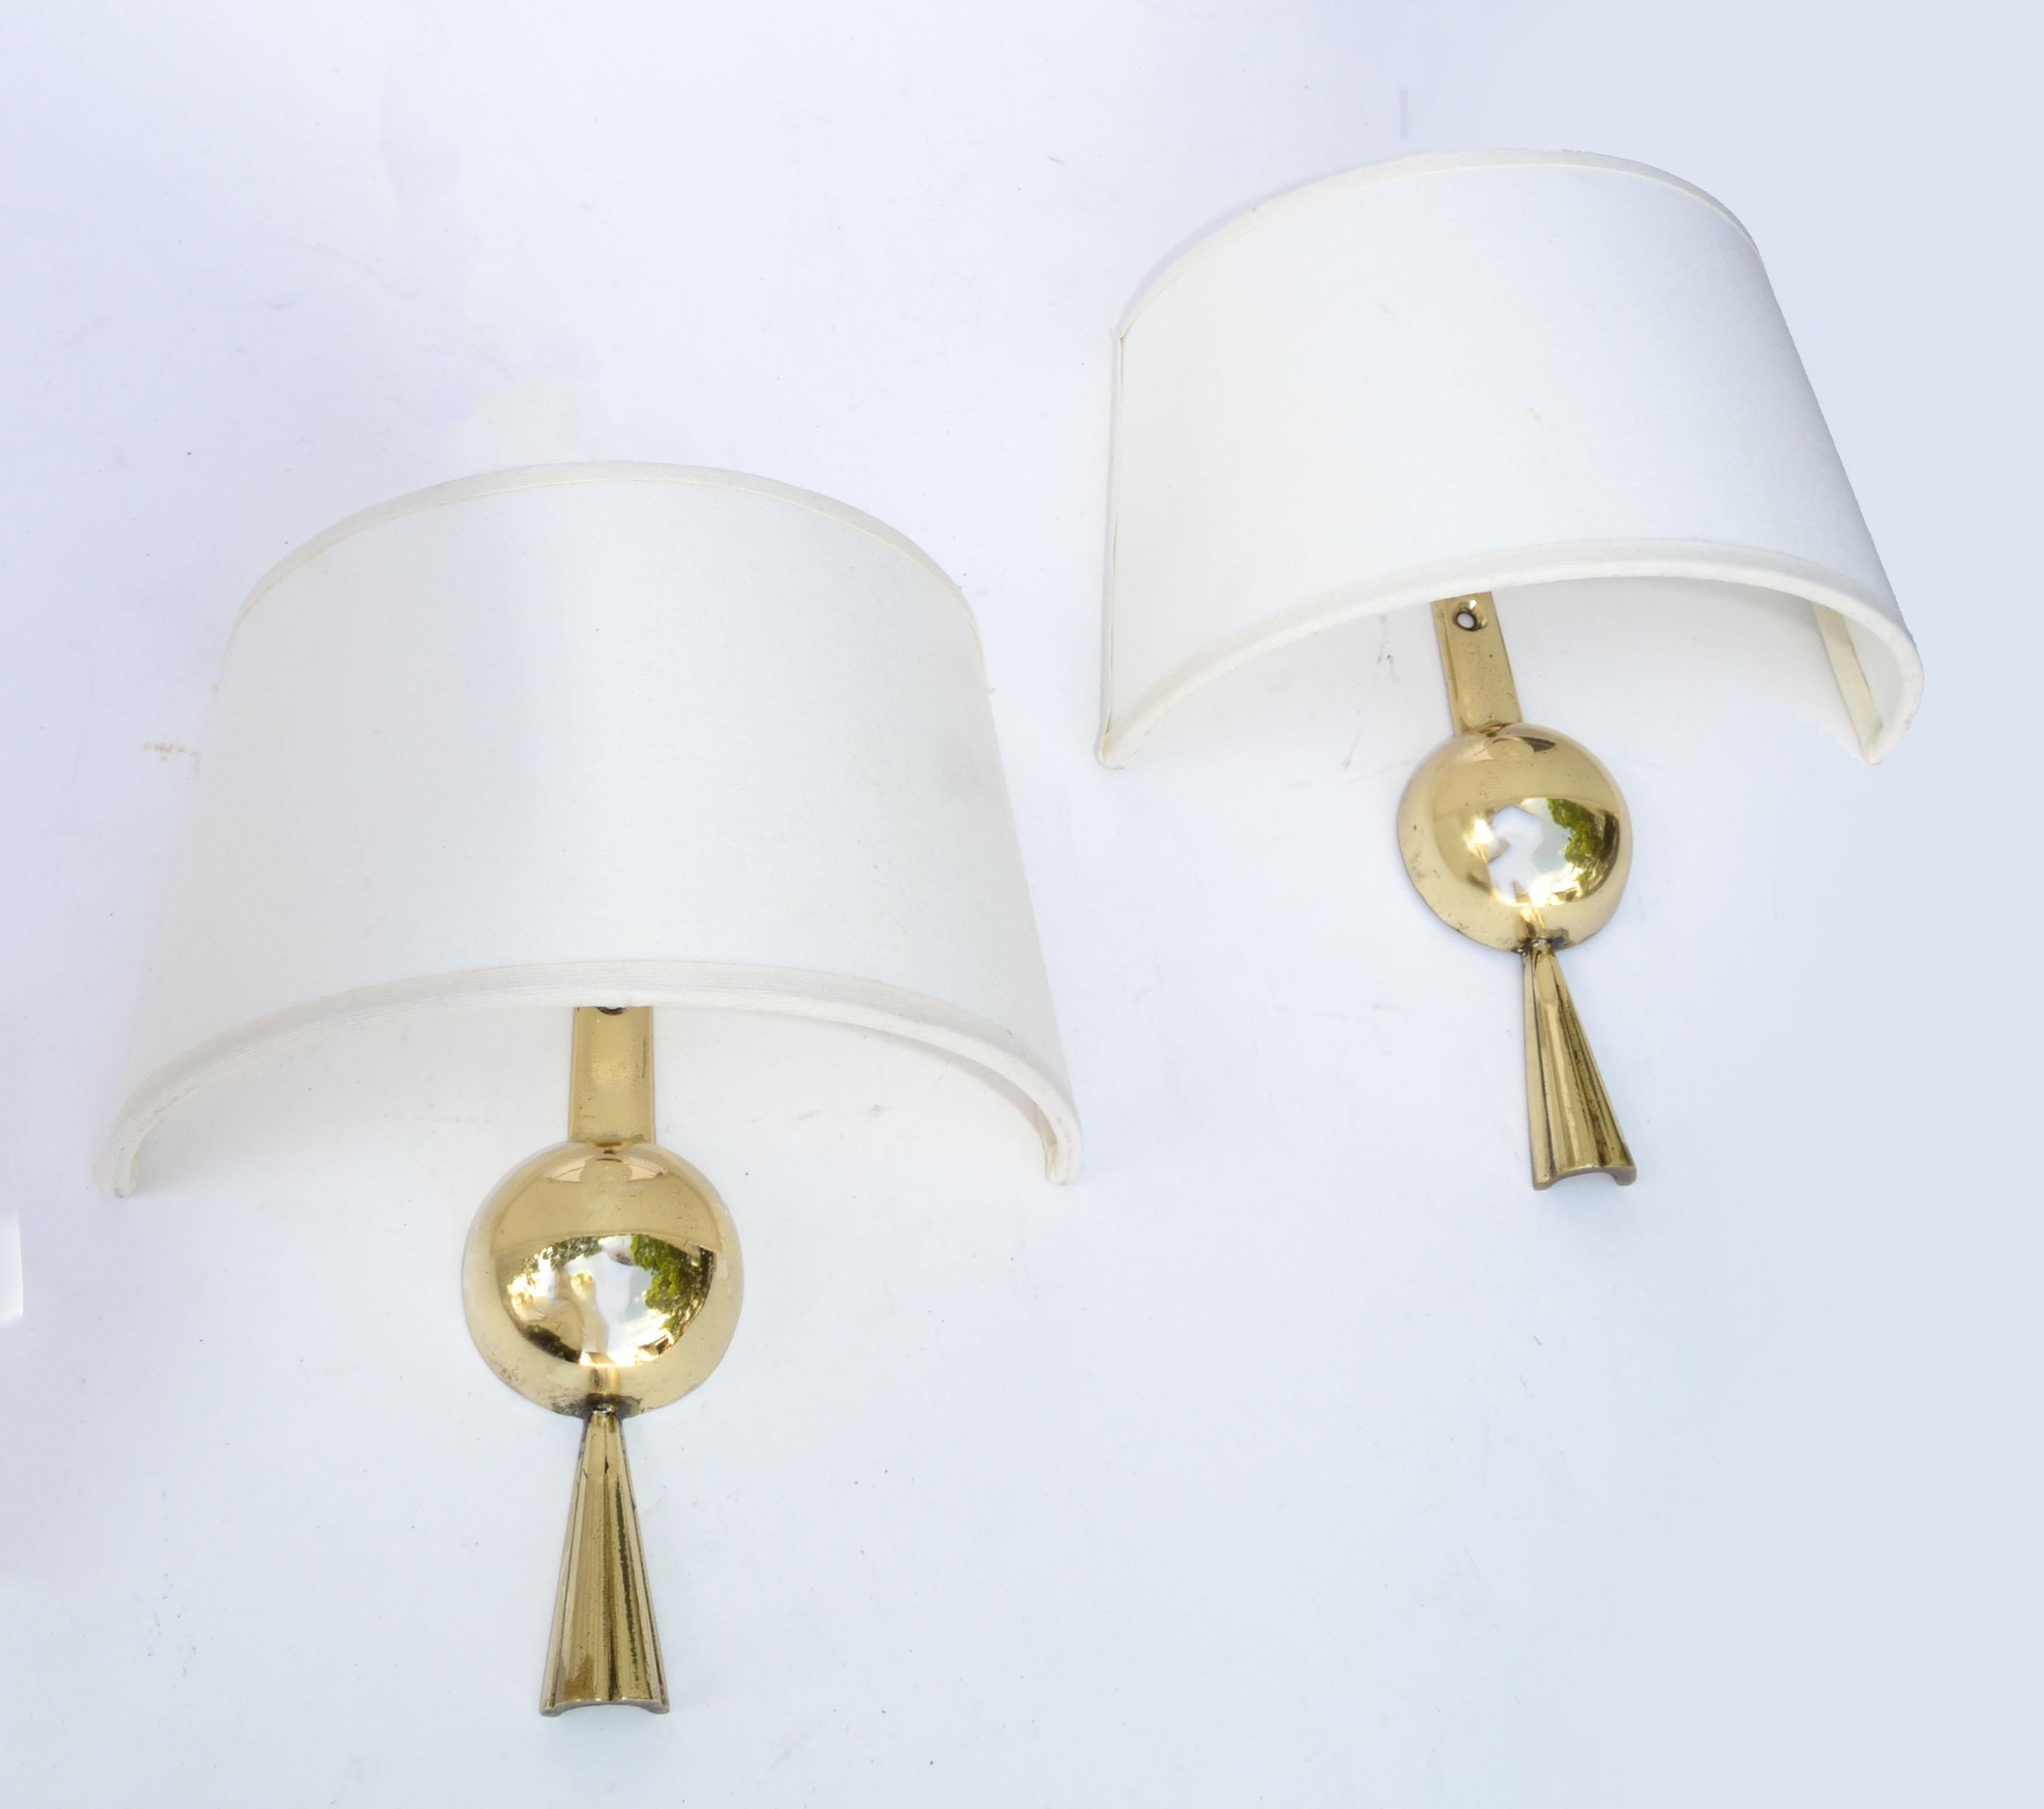 Signed Marcel Guillemard Bronze Sconces Wall Lamps France Neoclassical, Pair For Sale 8